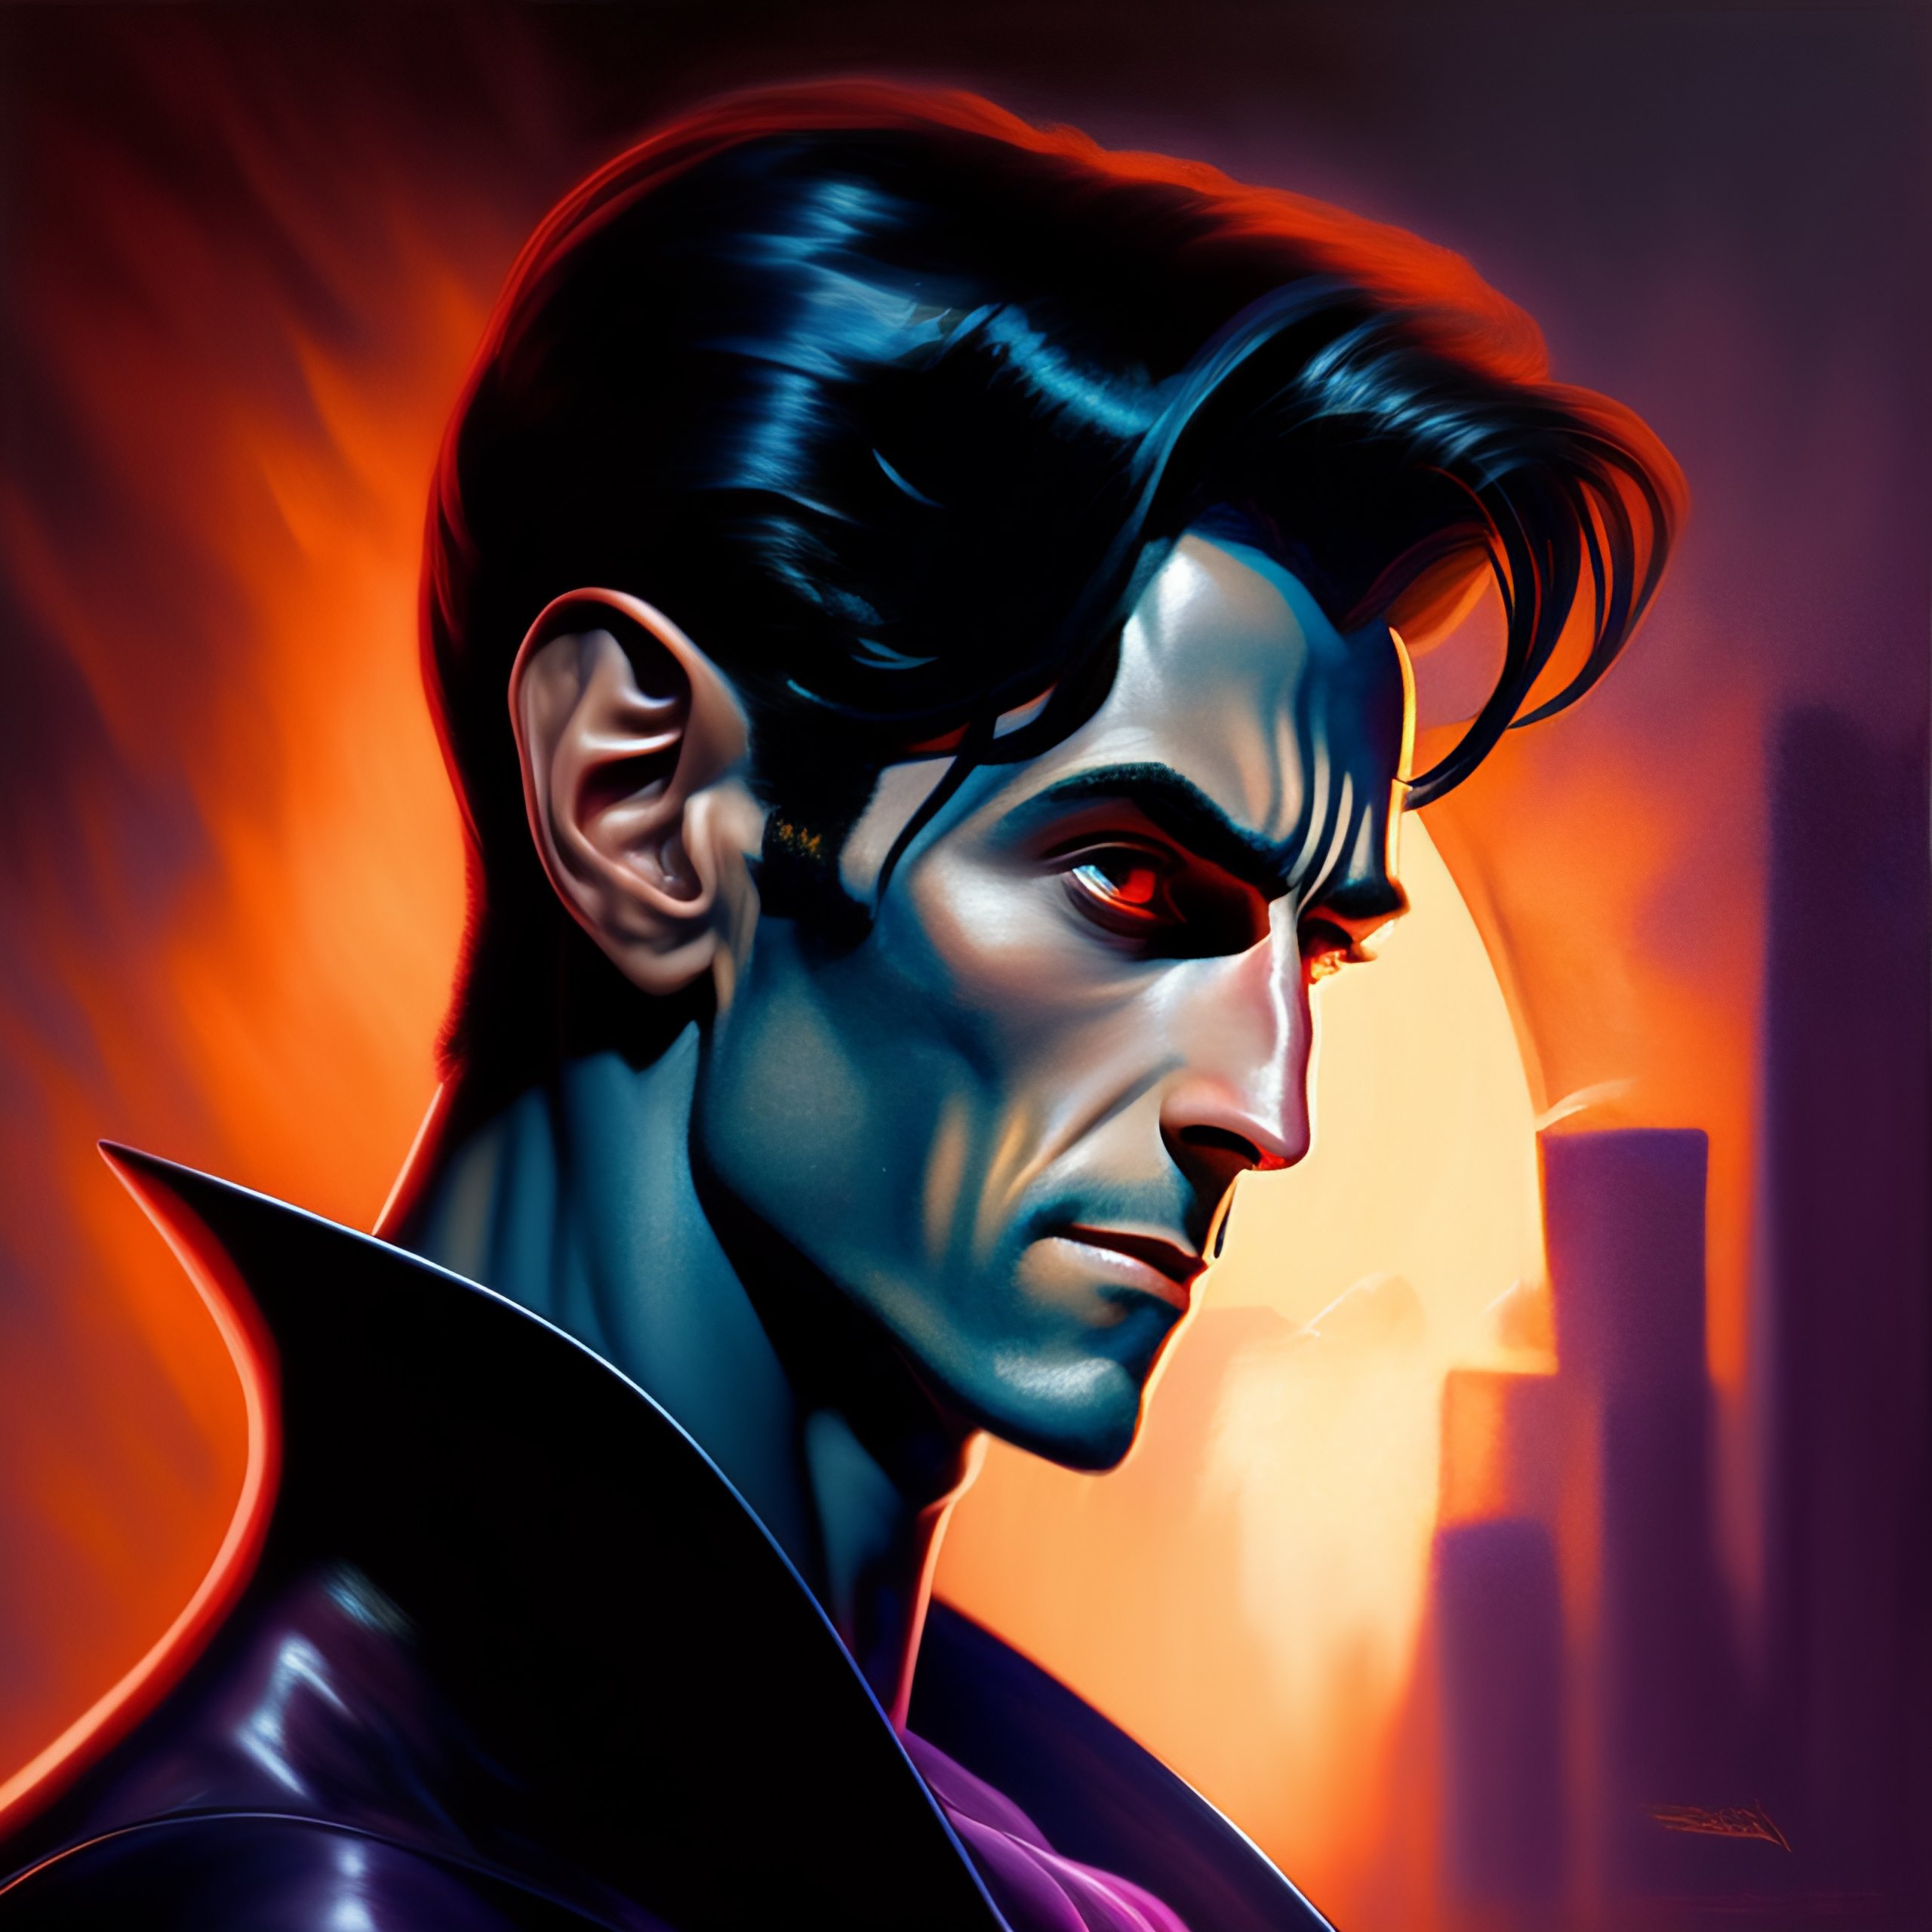 Lexica - Pixar: oil painting portrait of Nightcrawler from